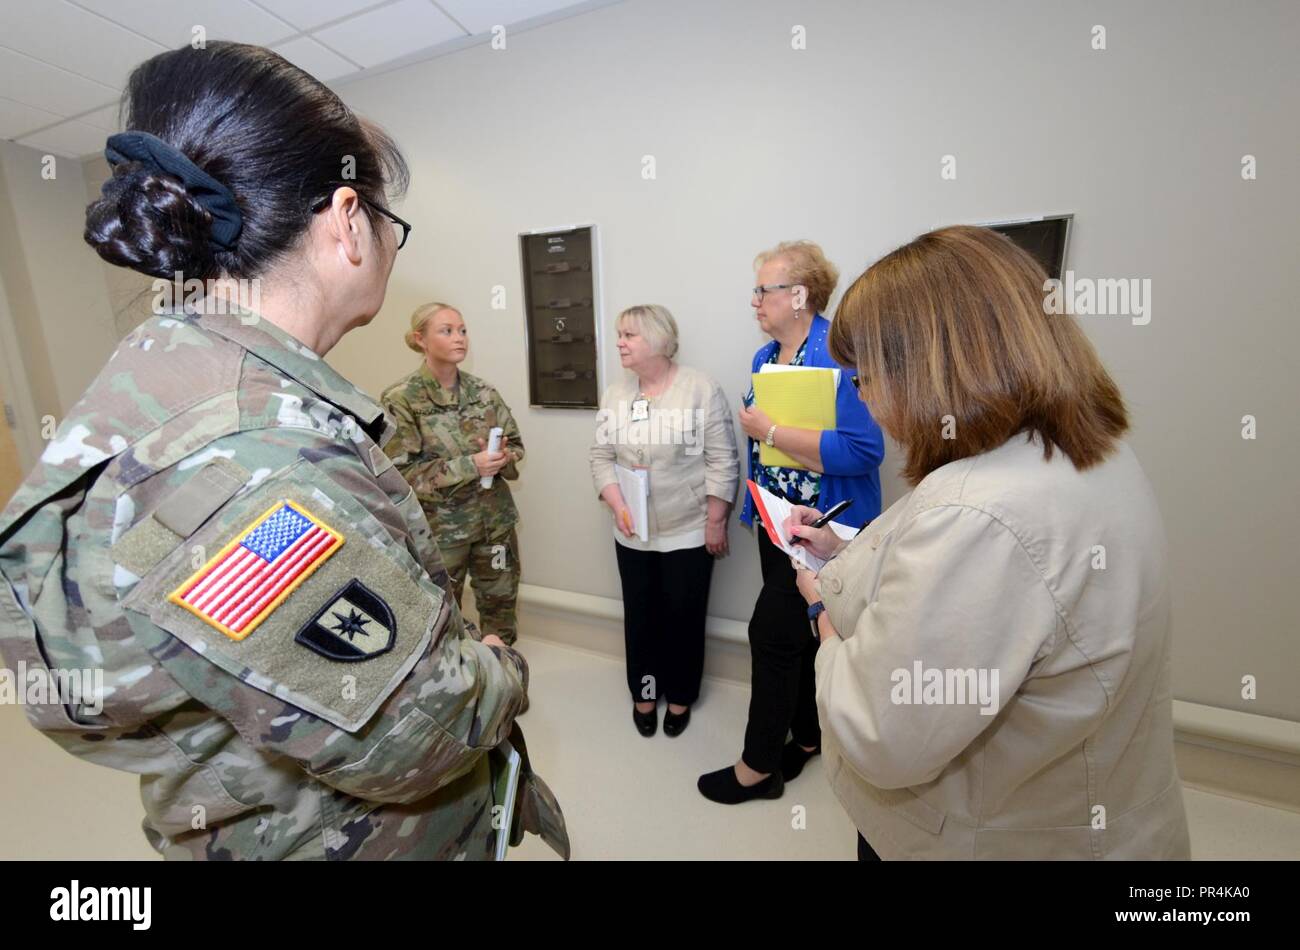 From left: Col. Hengmo McCall, Deputy Chief of Nursing Weed Army Community Hospital, Maj. Samantha Hanson, Chief of Quality Services Weed Army Community Hospital conduct leadership walk through with staff members from the Joint Commission Center for Transforming Healthcare during a site visit at Weed Army Community Hospital Sept. 13. Stock Photo